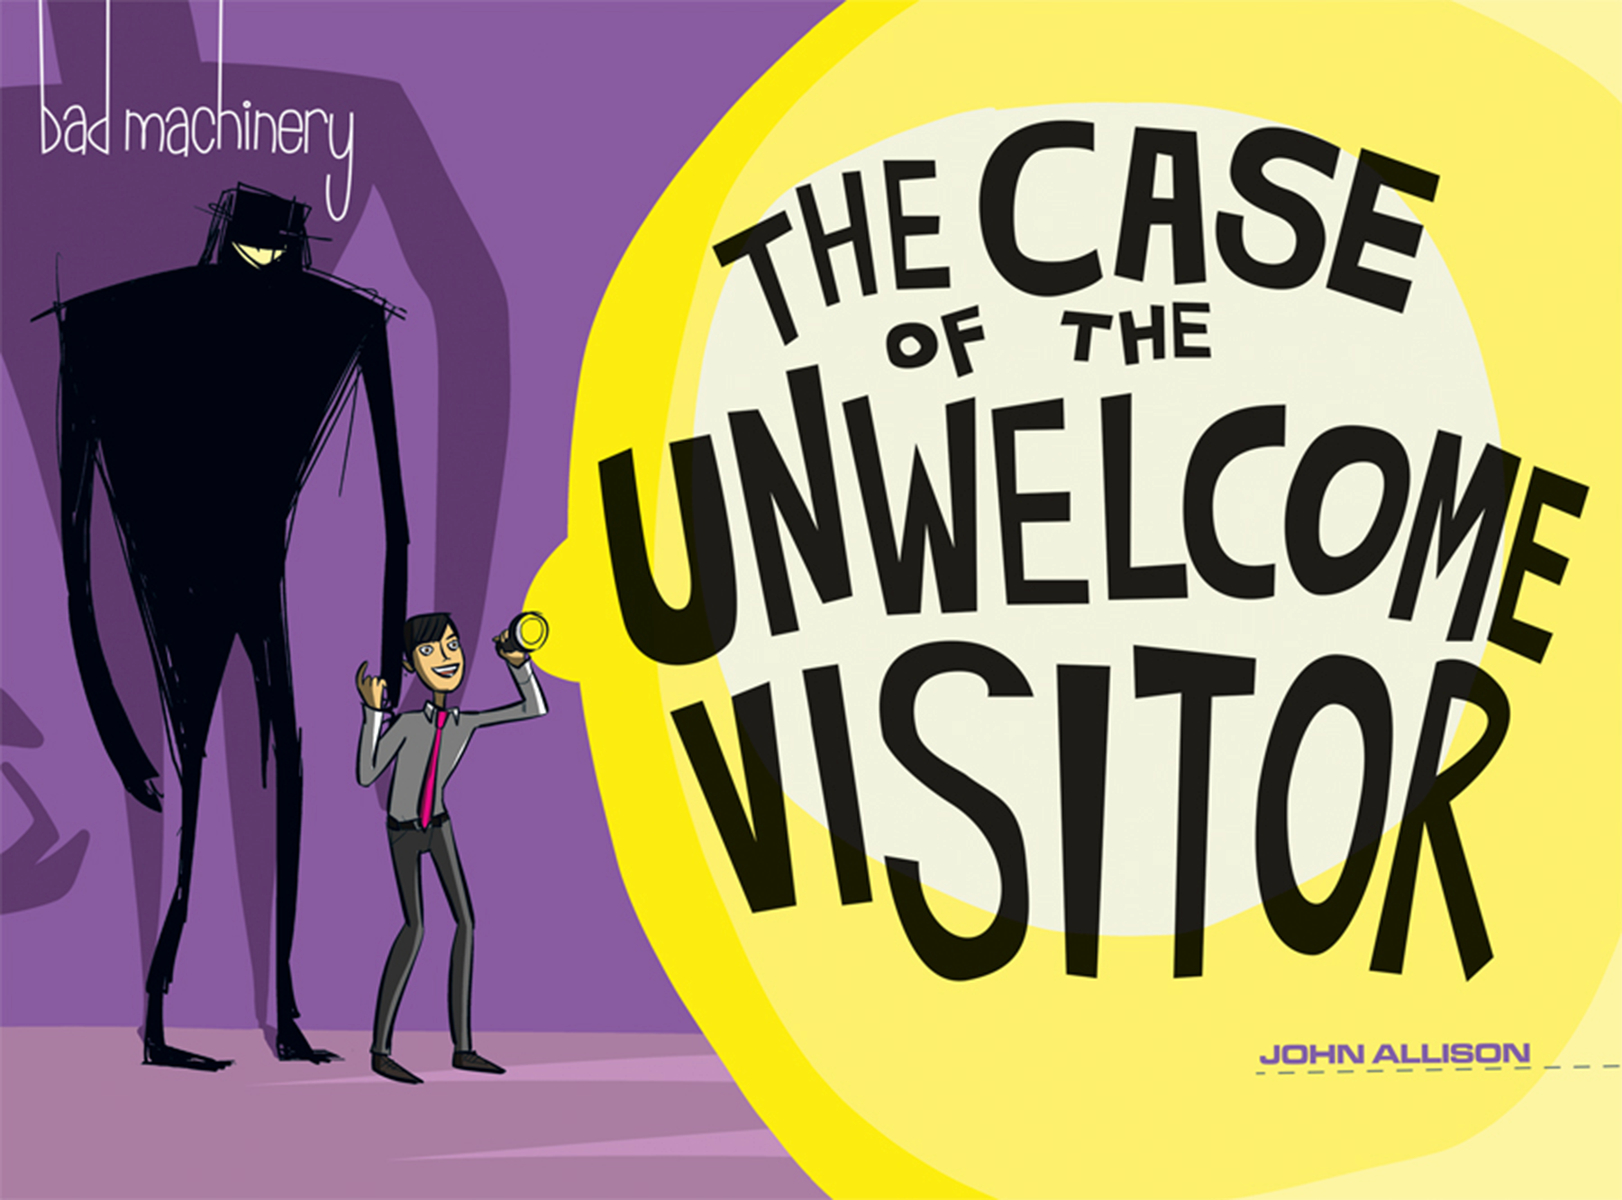 BAD MACHINERY GN VOL 06 CASE OF UNWELCOME VISITOR